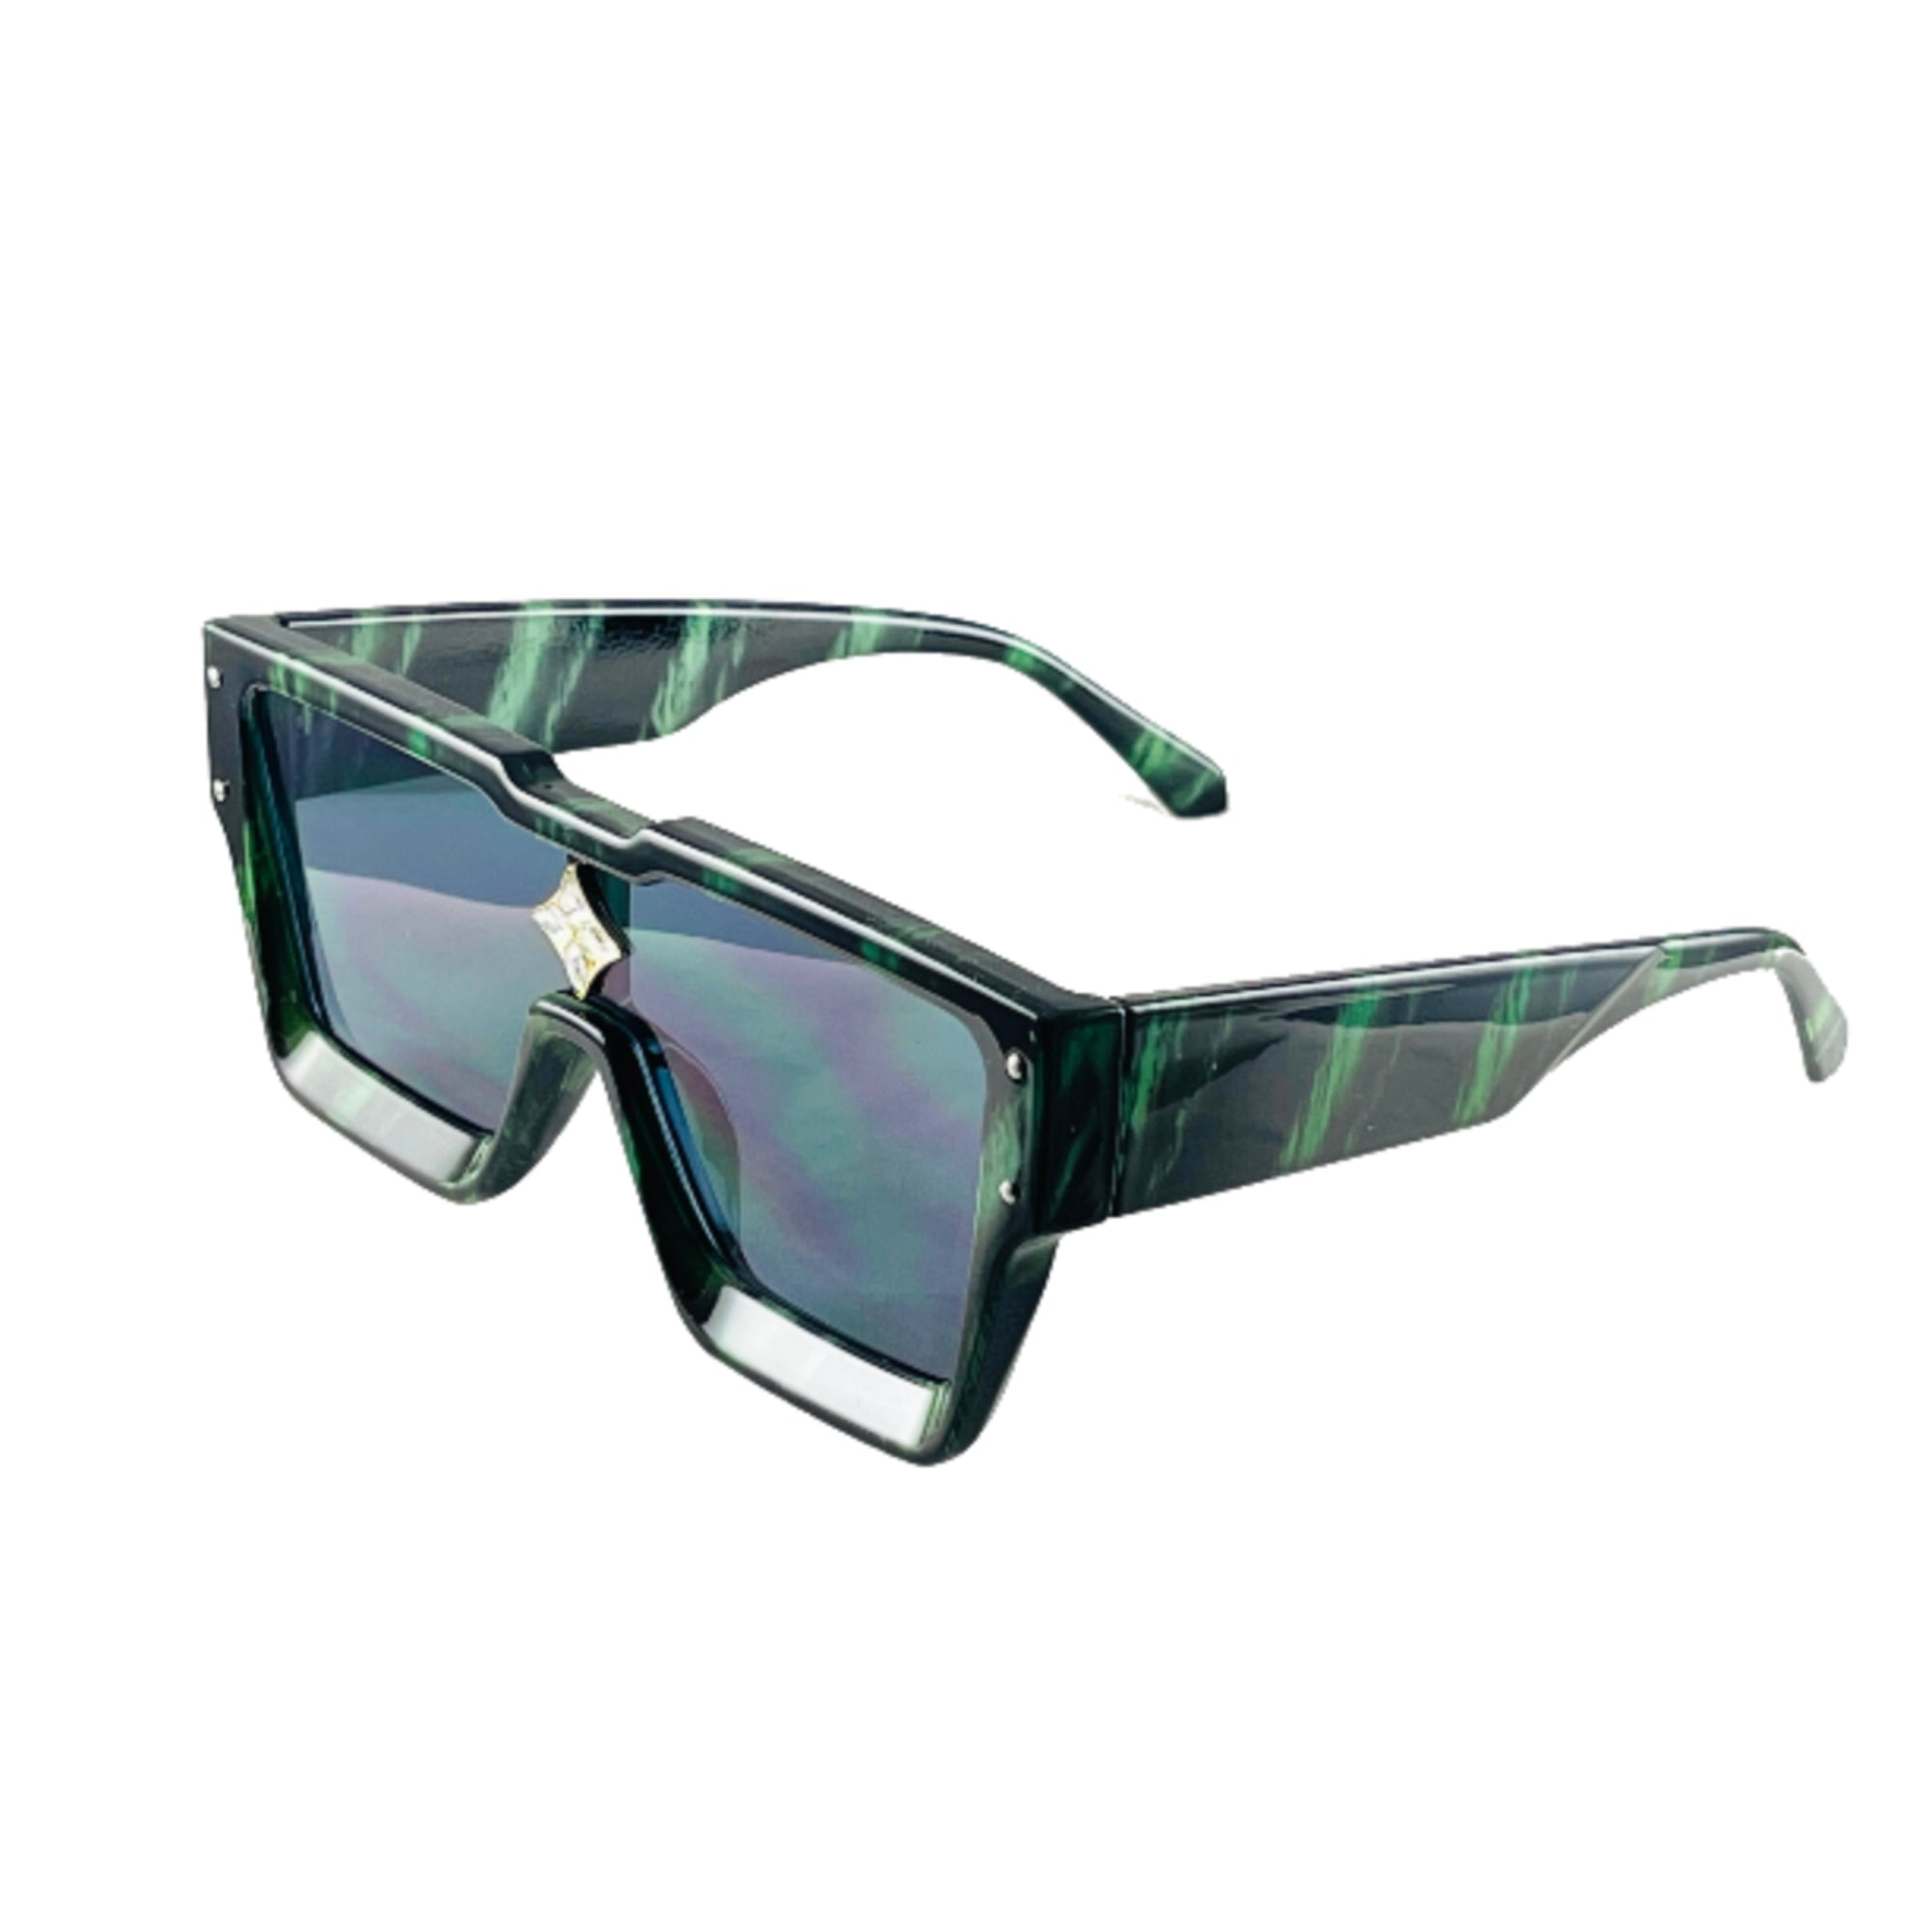 MizDragonfly Accessories Atomic Shield Sunglasses Galactic Green Side